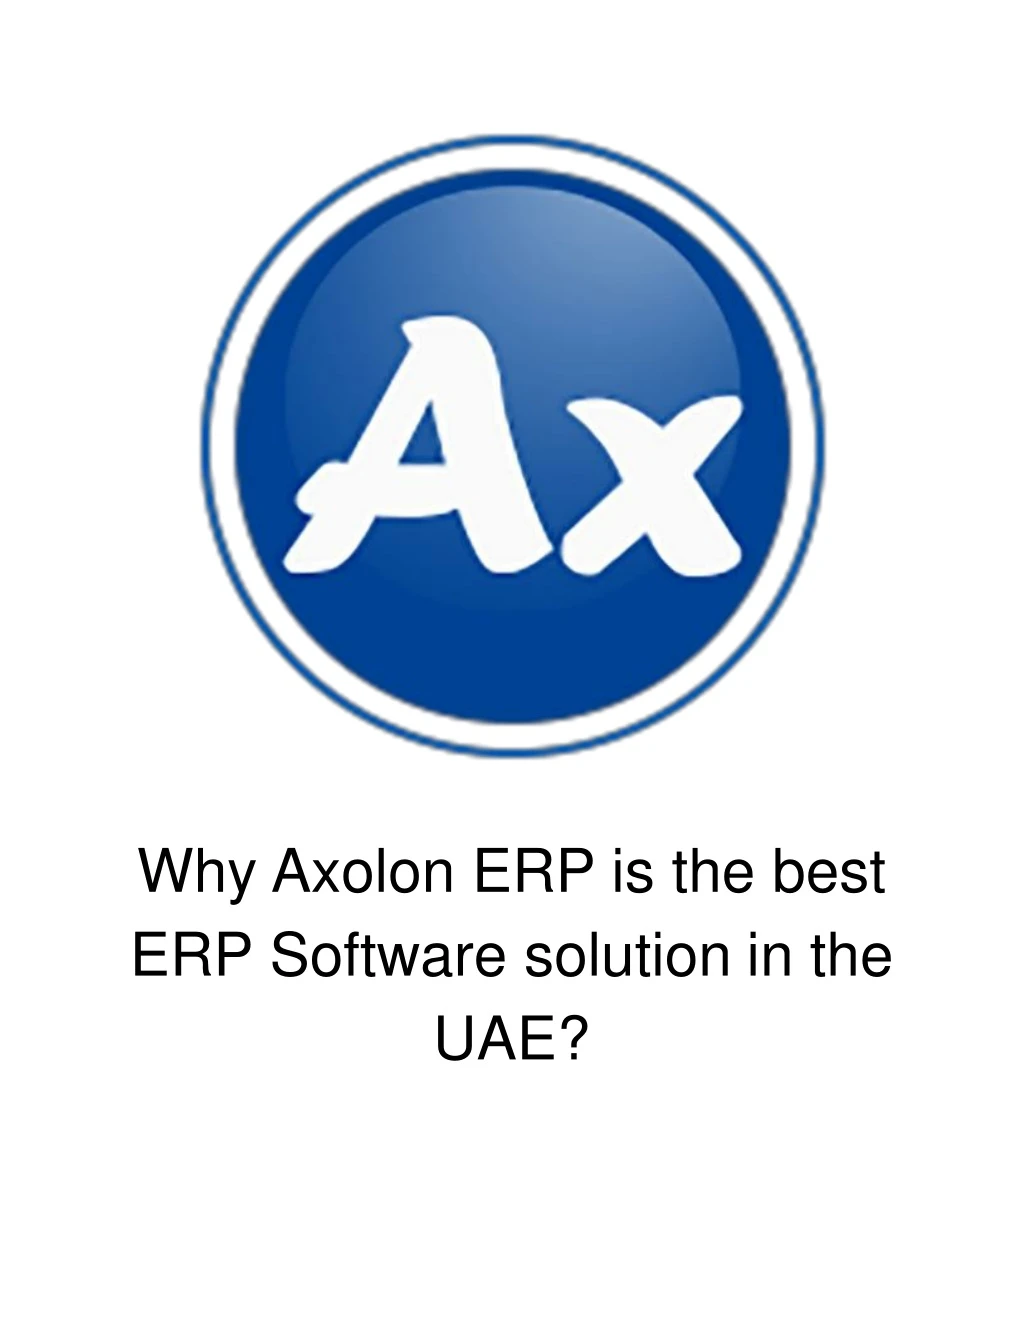 why axolon erp is the best erp software solution